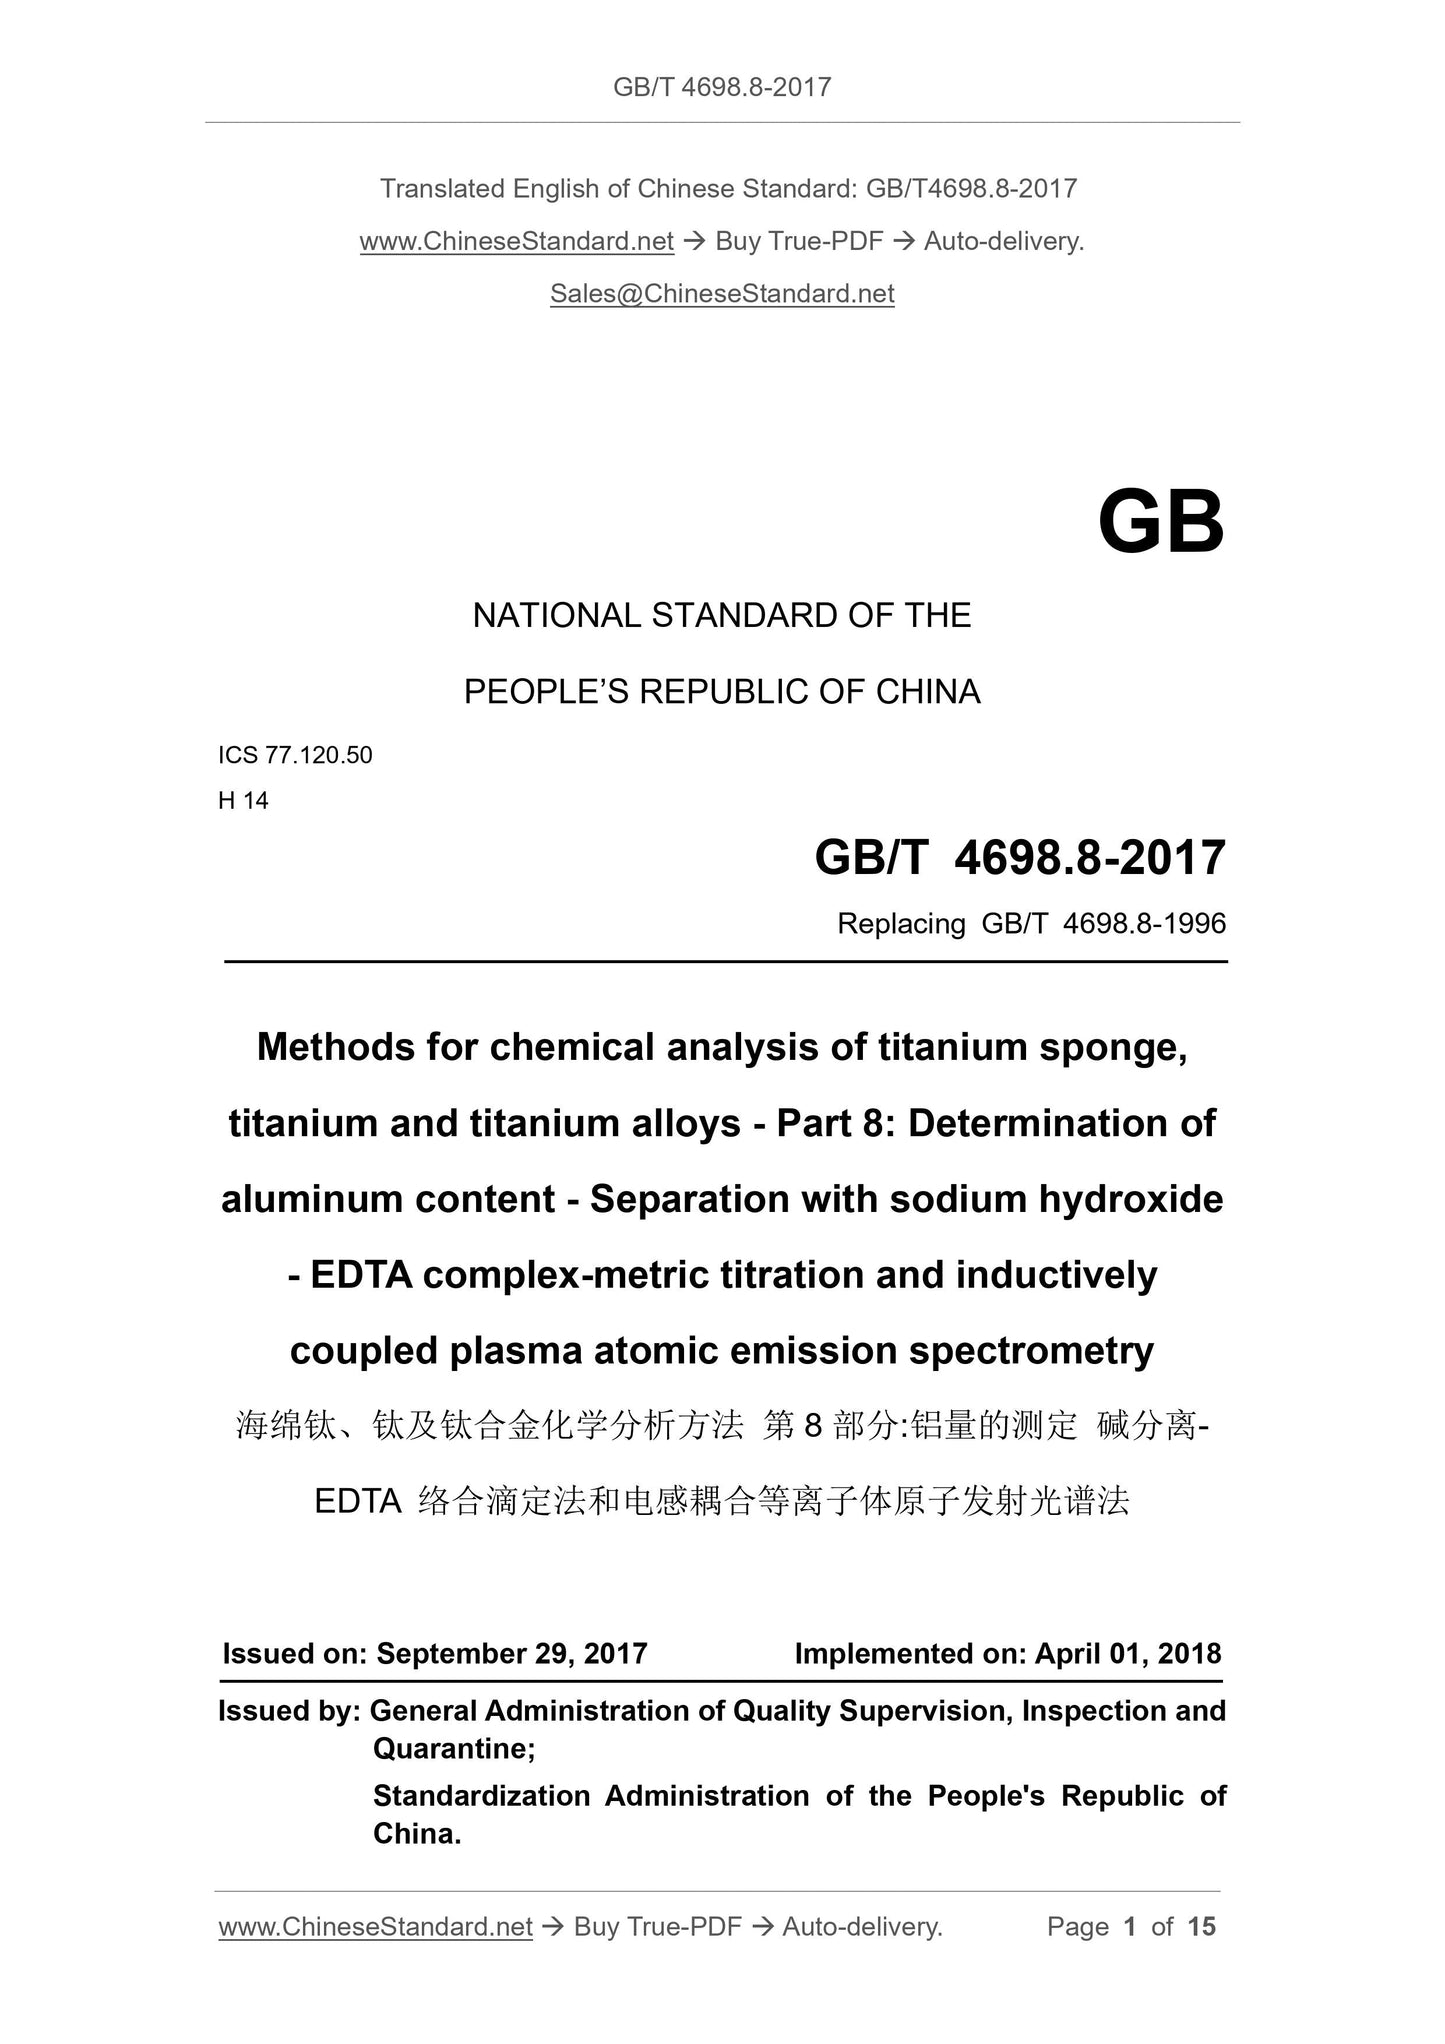 GB/T 4698.8-2017 Page 1